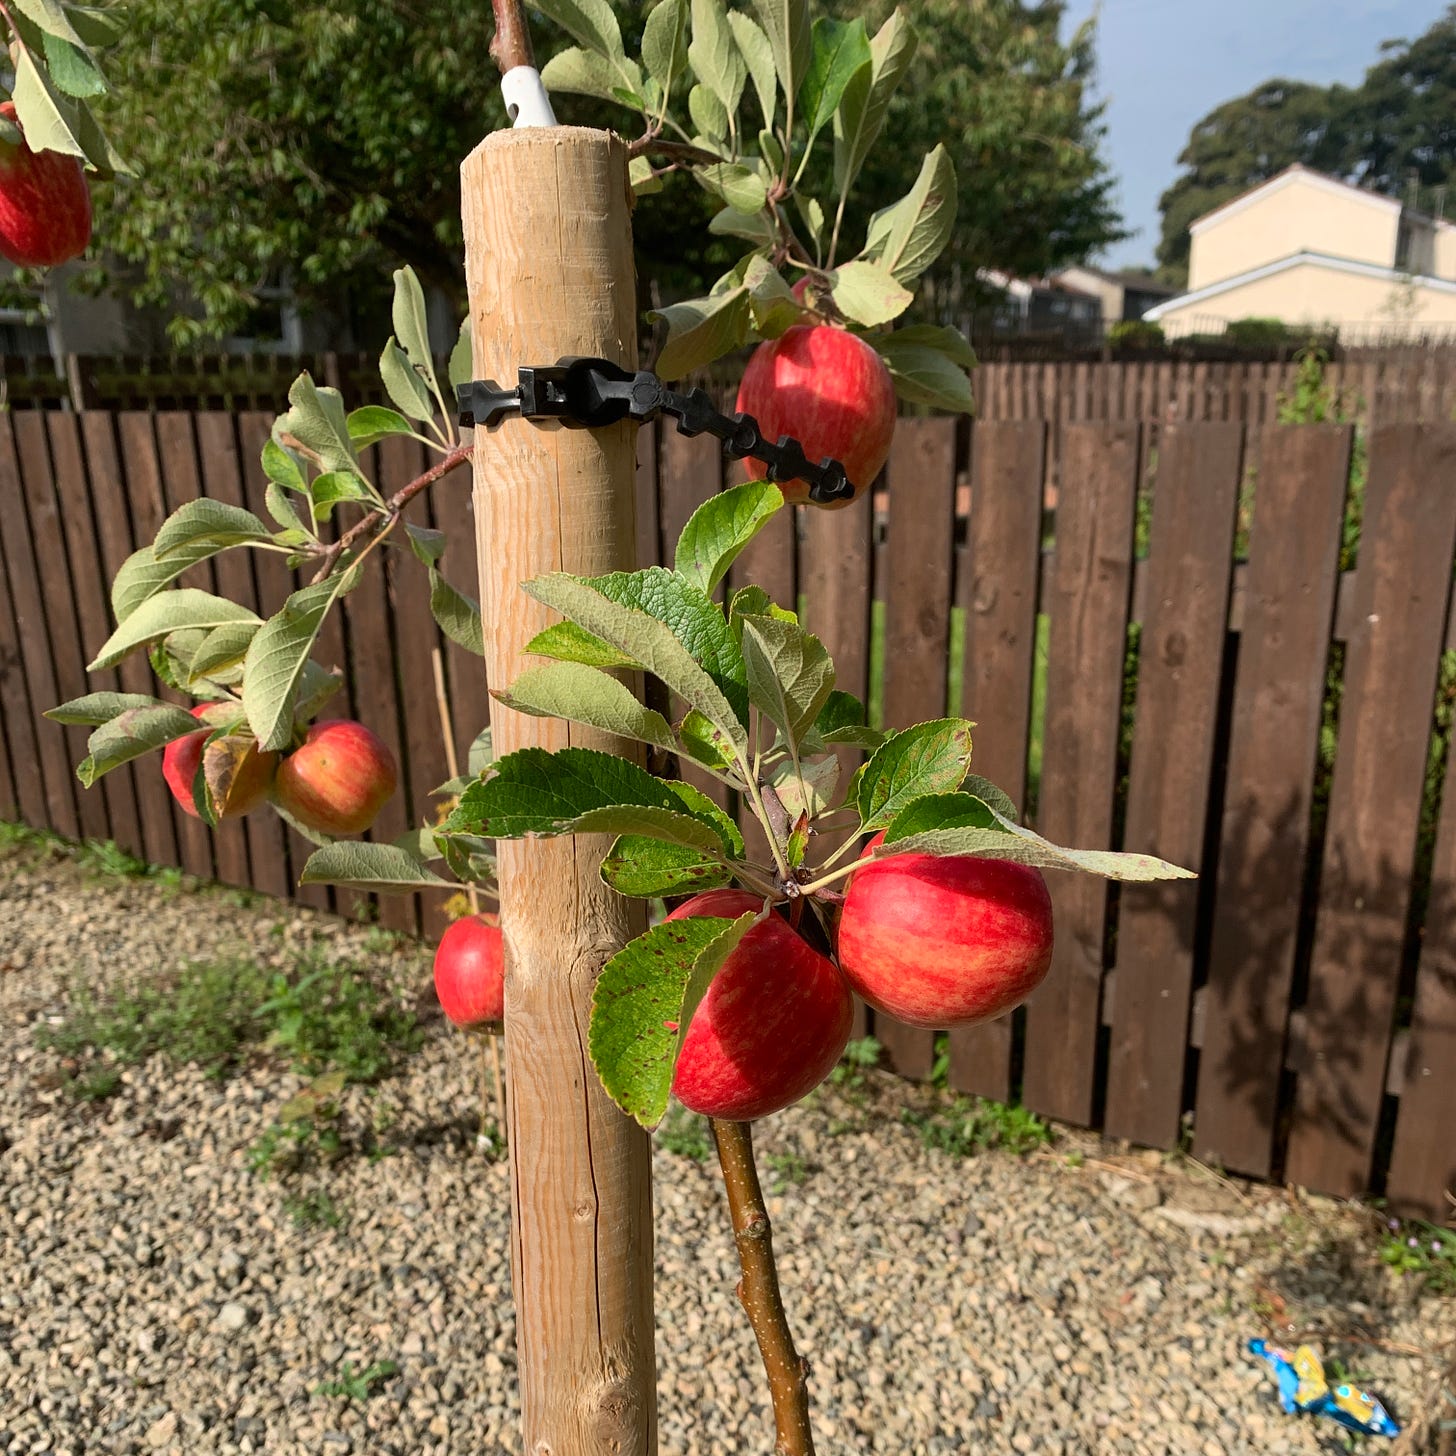 Reddening apples growing on a tiny tree